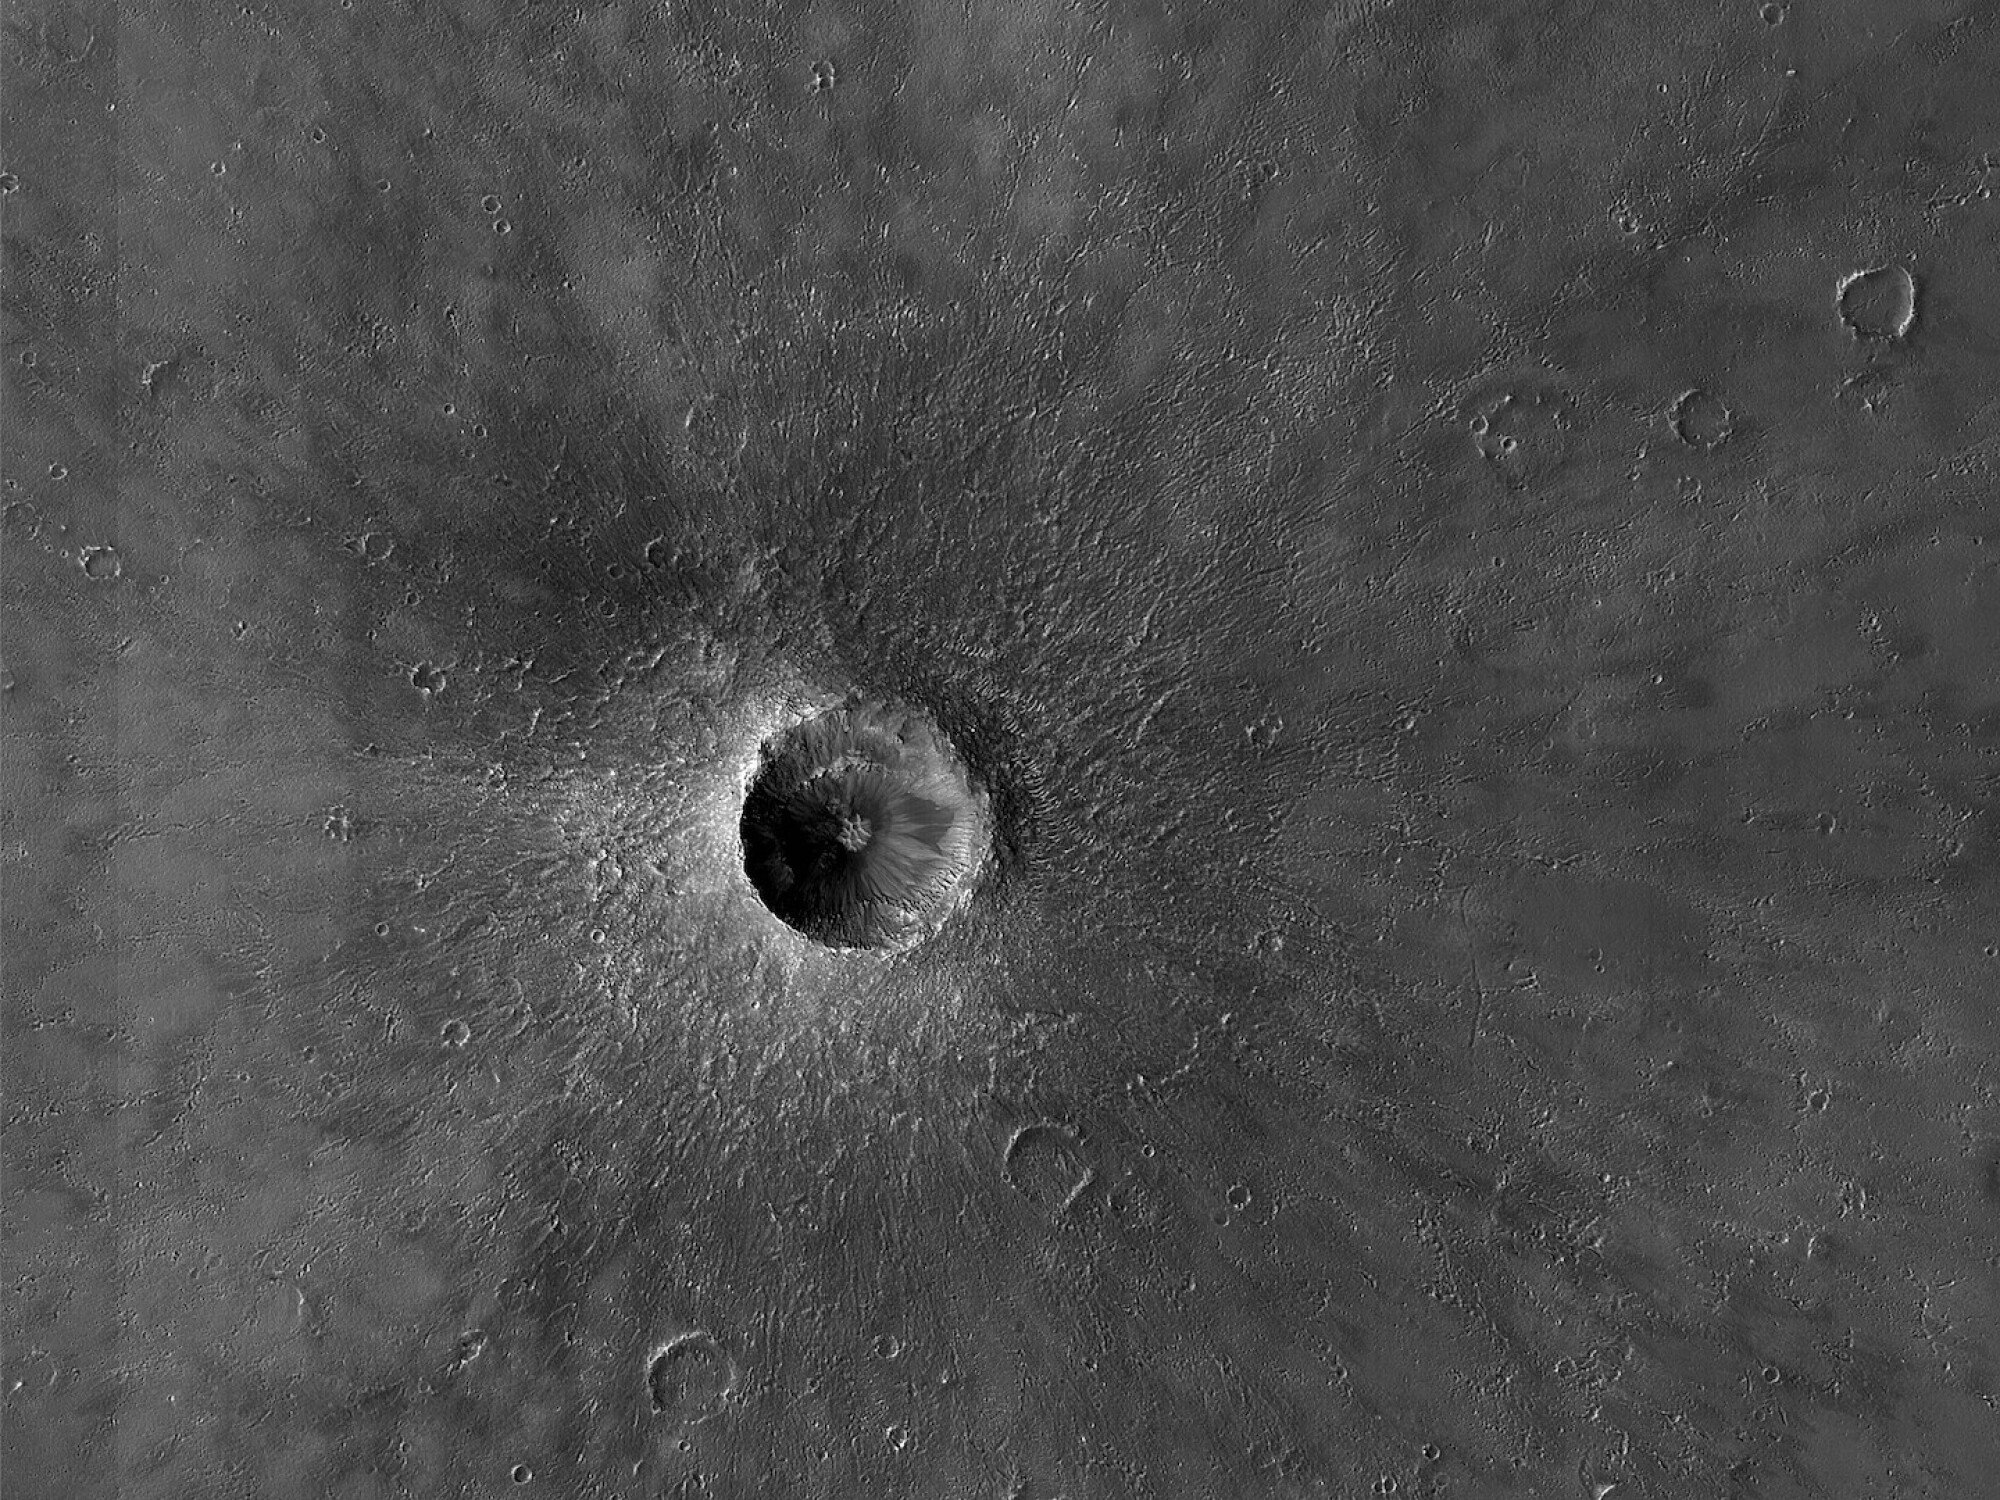 The "very recent" impact crater spotted in the equatorial region of Mars.